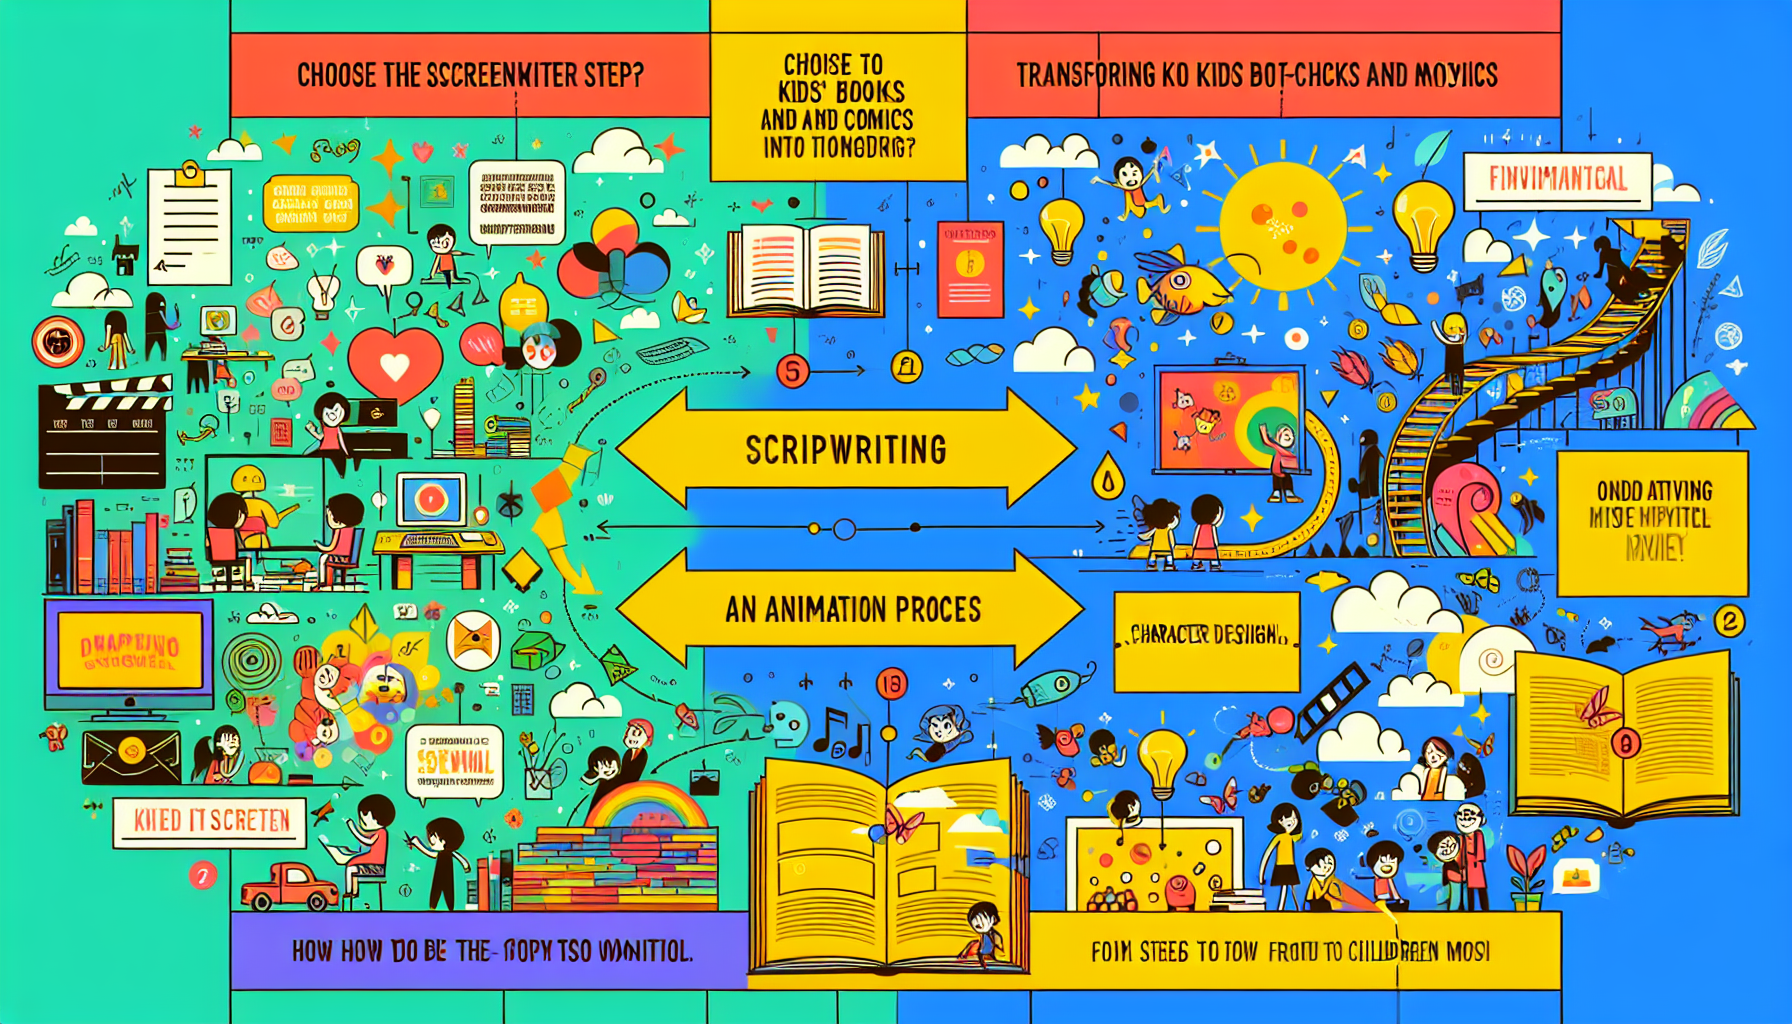 A vibrant and contemporary visual representation of a screenwriter's guide on the process of transforming kids' books and comics into animated movies. The graphic should illustrate fundamental steps such as choosing the source material, scriptwriting, character design, and animation process, all in a playful and visually engaging manner suitable for a children's audience. The overall theme should be light-hearted and inspiring, showing the magical journey of a story from page to screen. Remember, the guide should be entirely visual without any text.